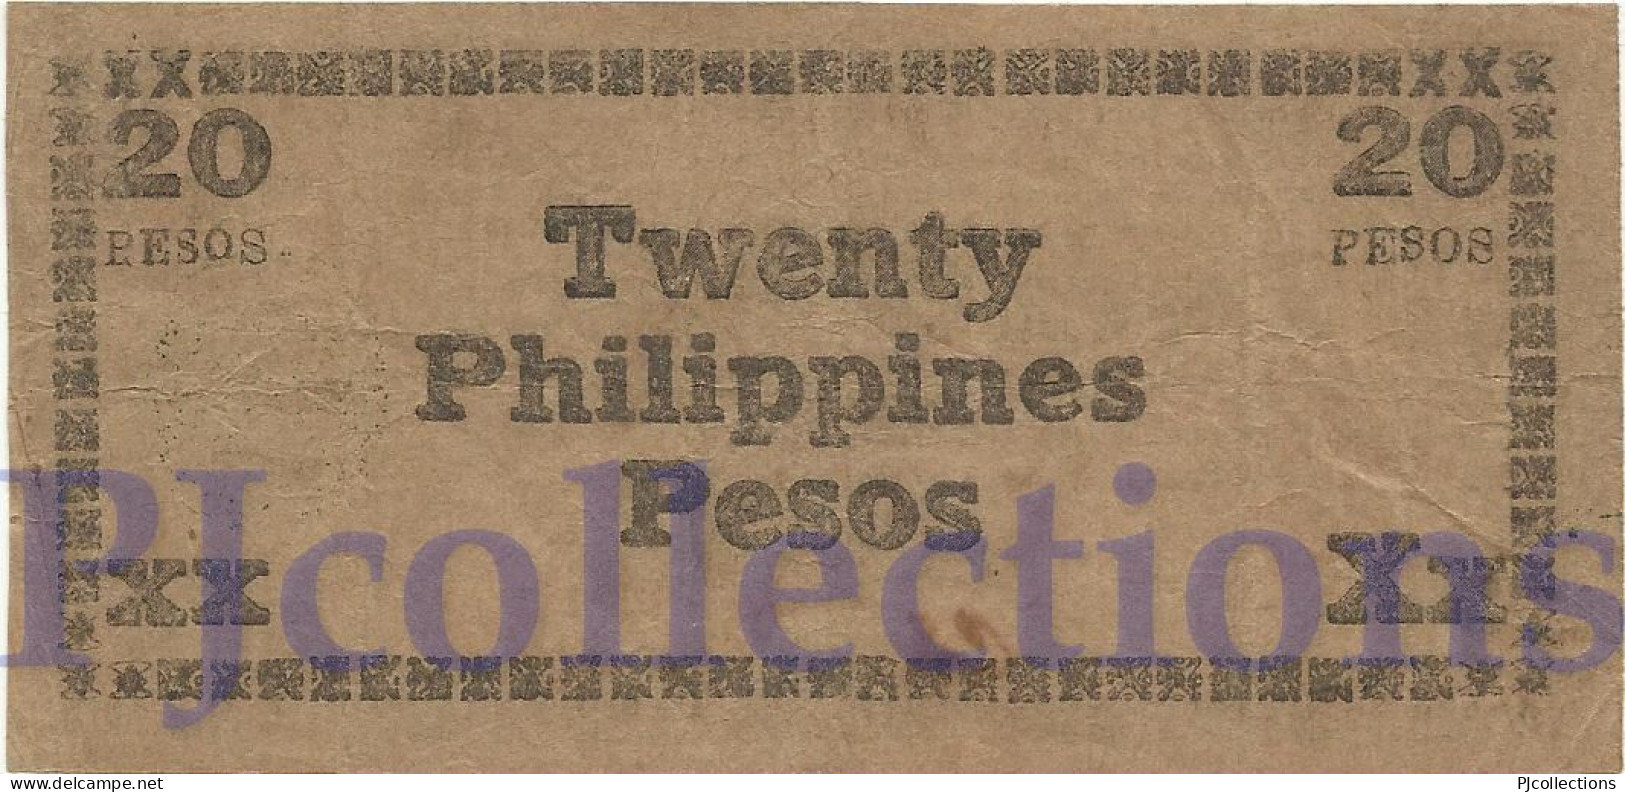 PHILIPPINES 20 PESOS 1944 PICK S680a VF EMERGENCY BANKNOTE - Philippines